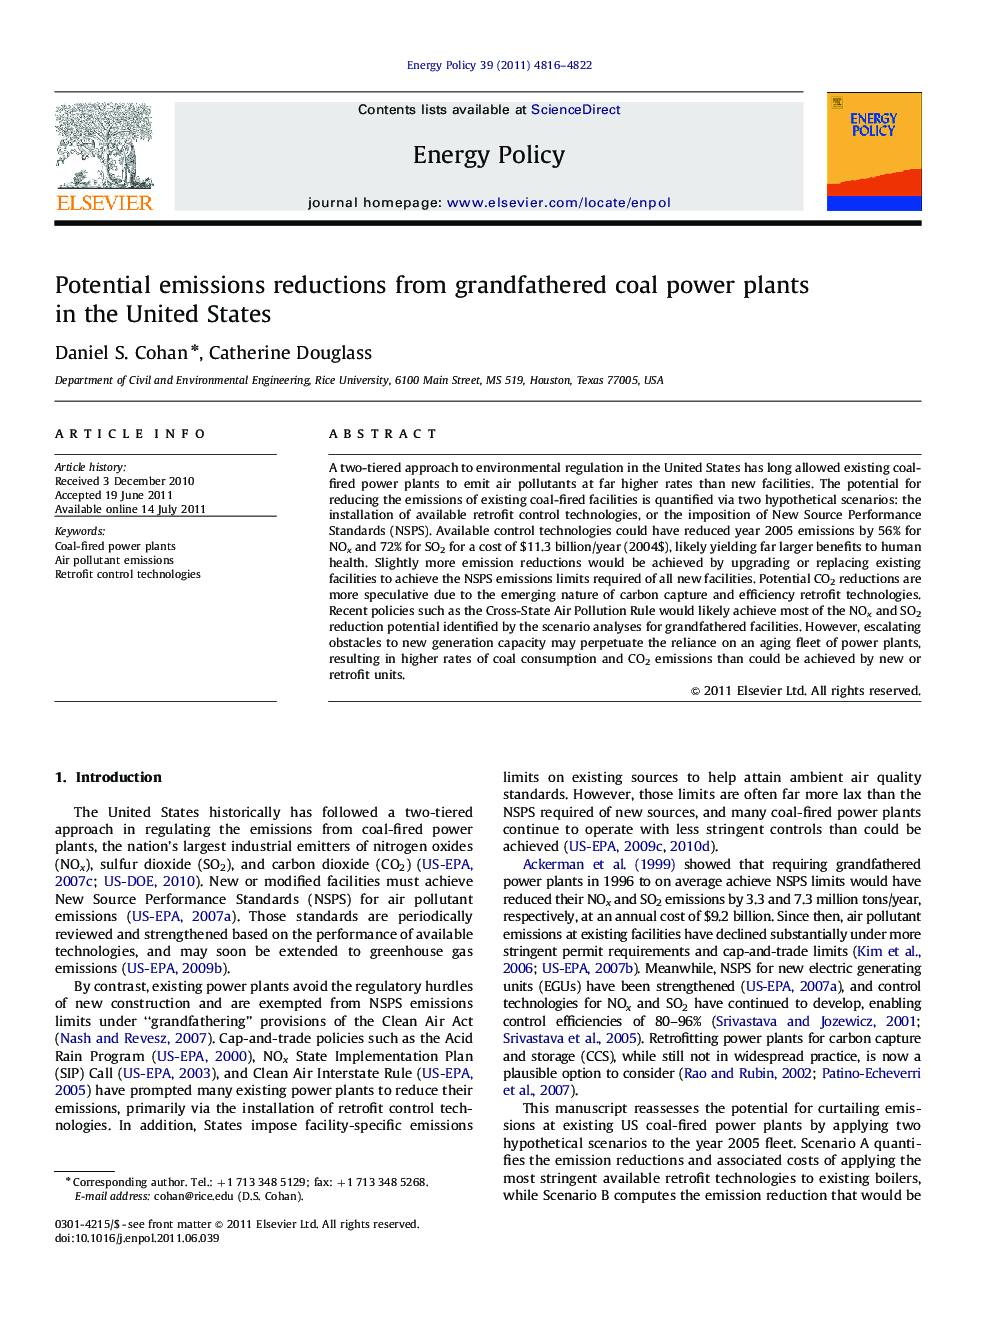 Potential emissions reductions from grandfathered coal power plants in the United States